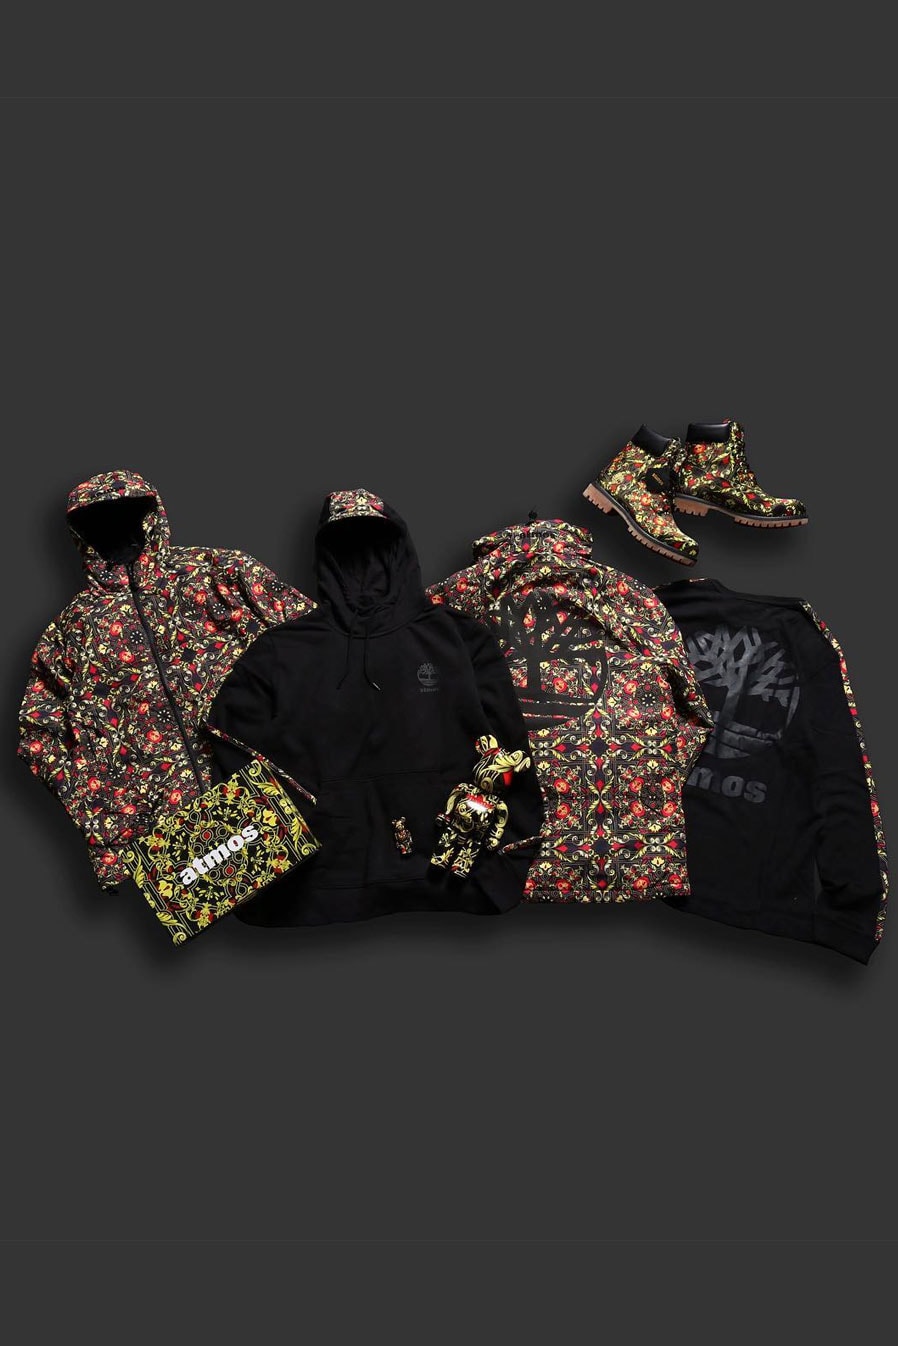 Timberland x atmos "Scarf" Collection Release Info patterns scarfs boots classic New York tan Japan Tokyo bearbrick Be@rbricks collectibles medicom figures 